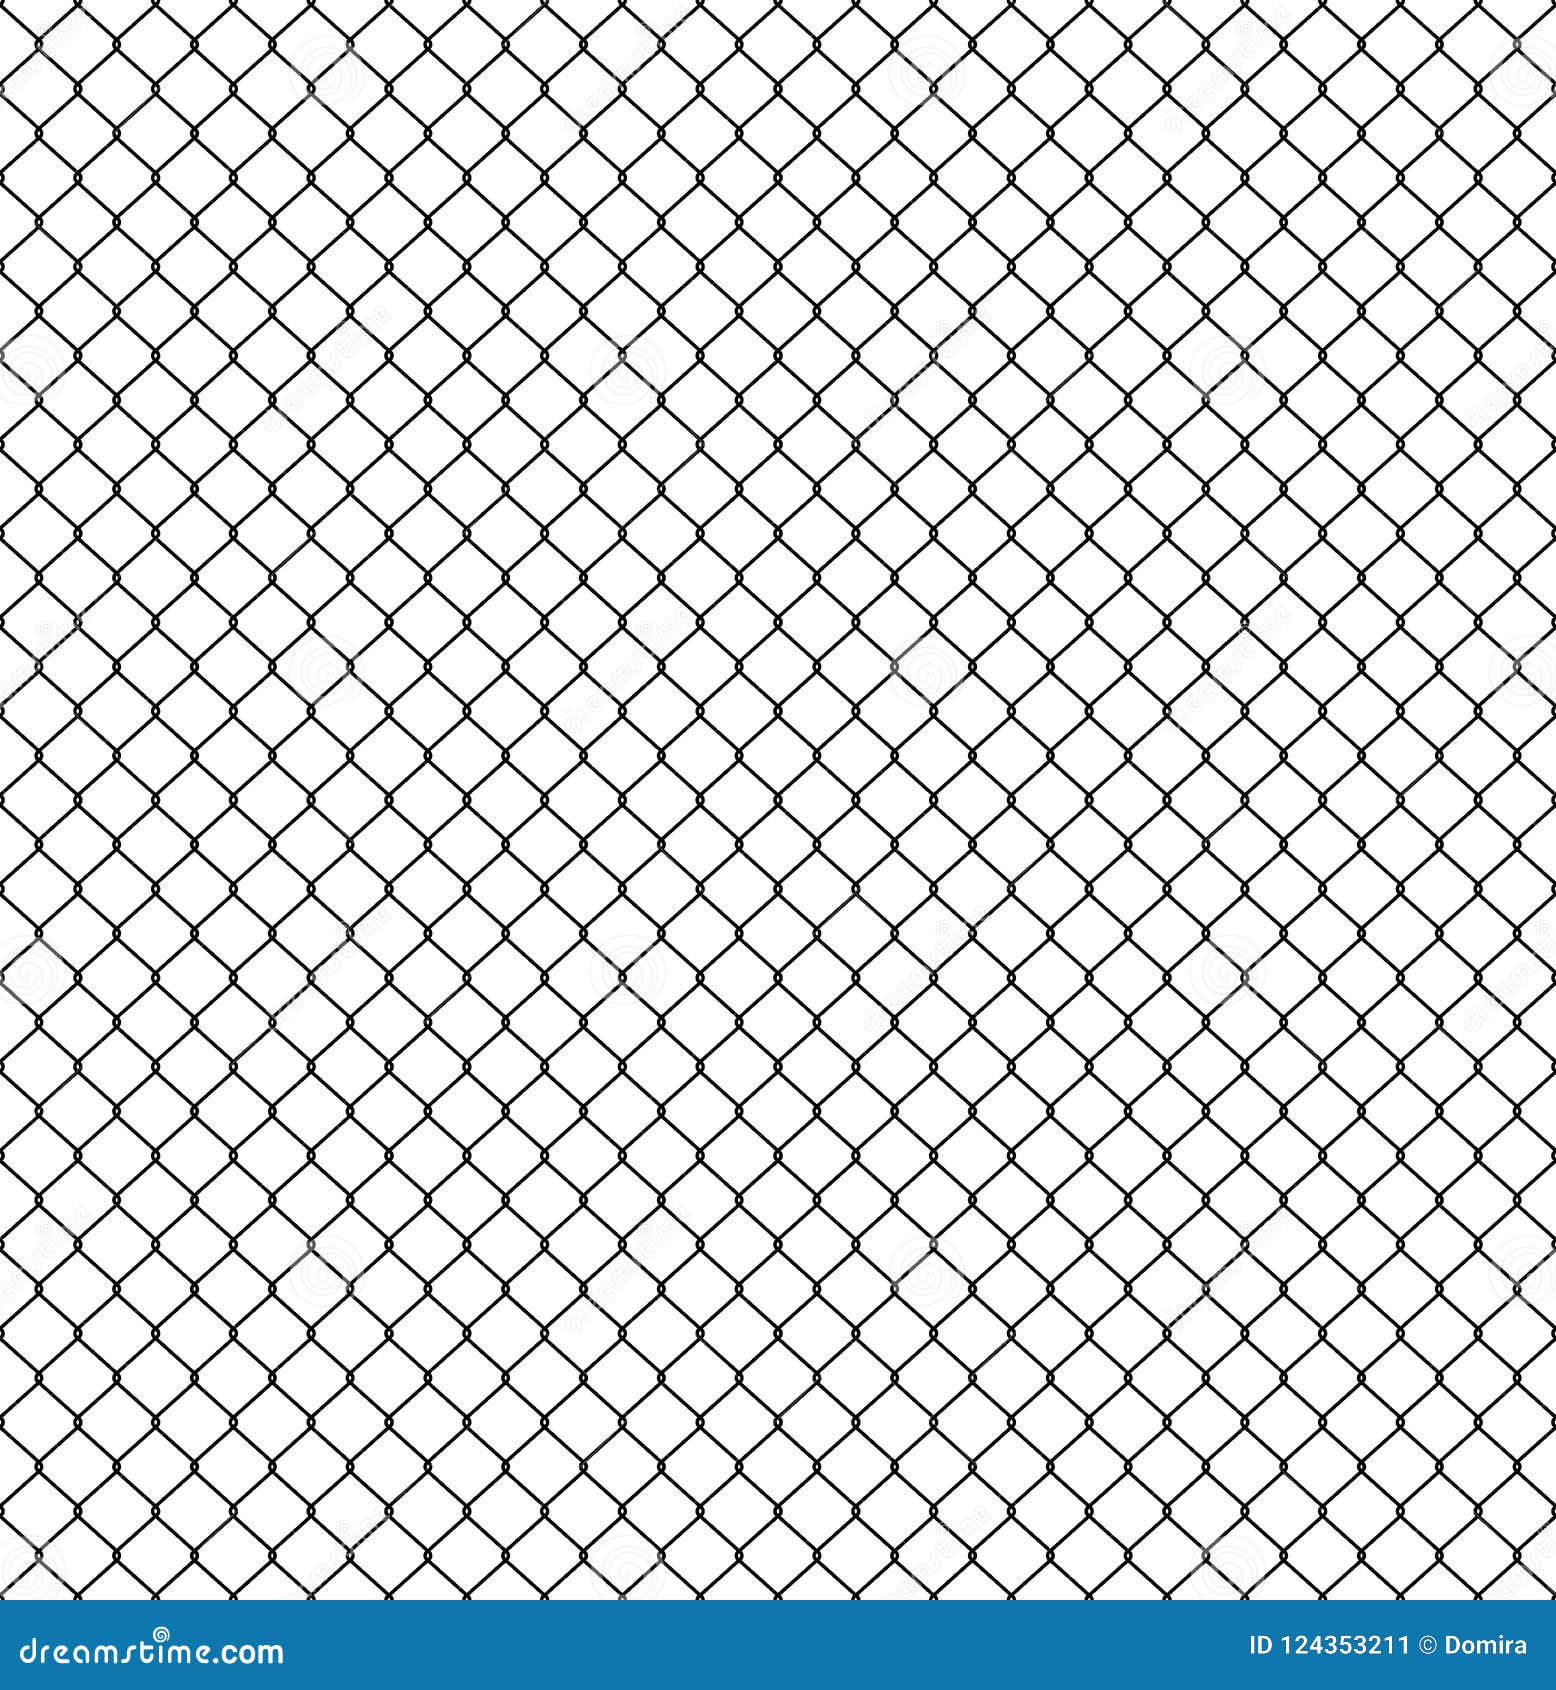 Seamless Fence Pattern. Connection of Protective Grid Elements Stock ...